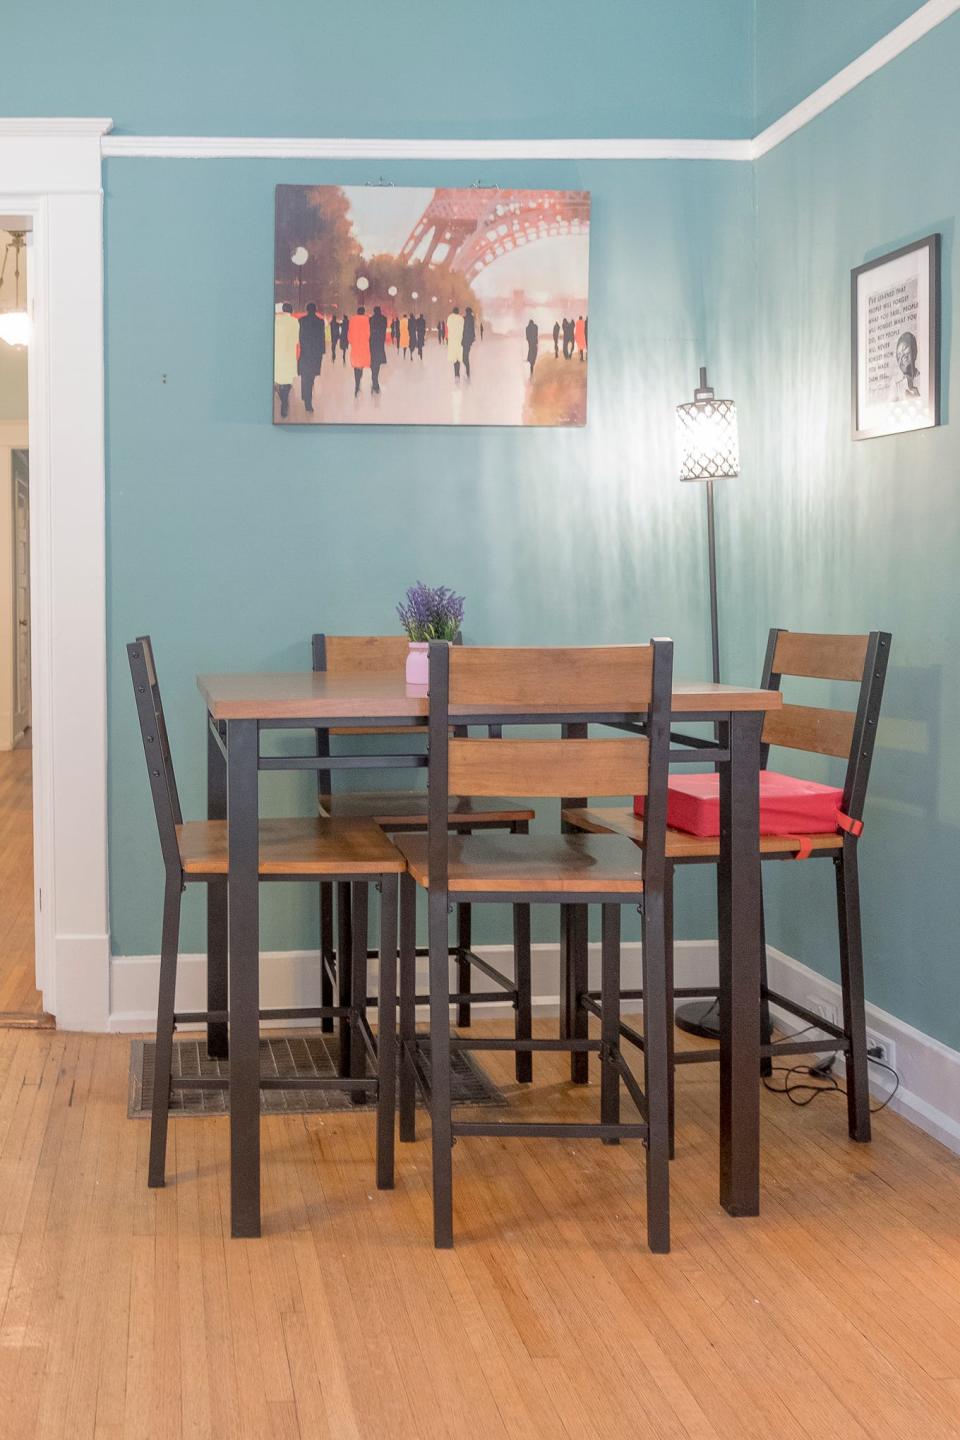 This eating area satisfies the family's need for a comfortable and convenient place to enjoy a meal.